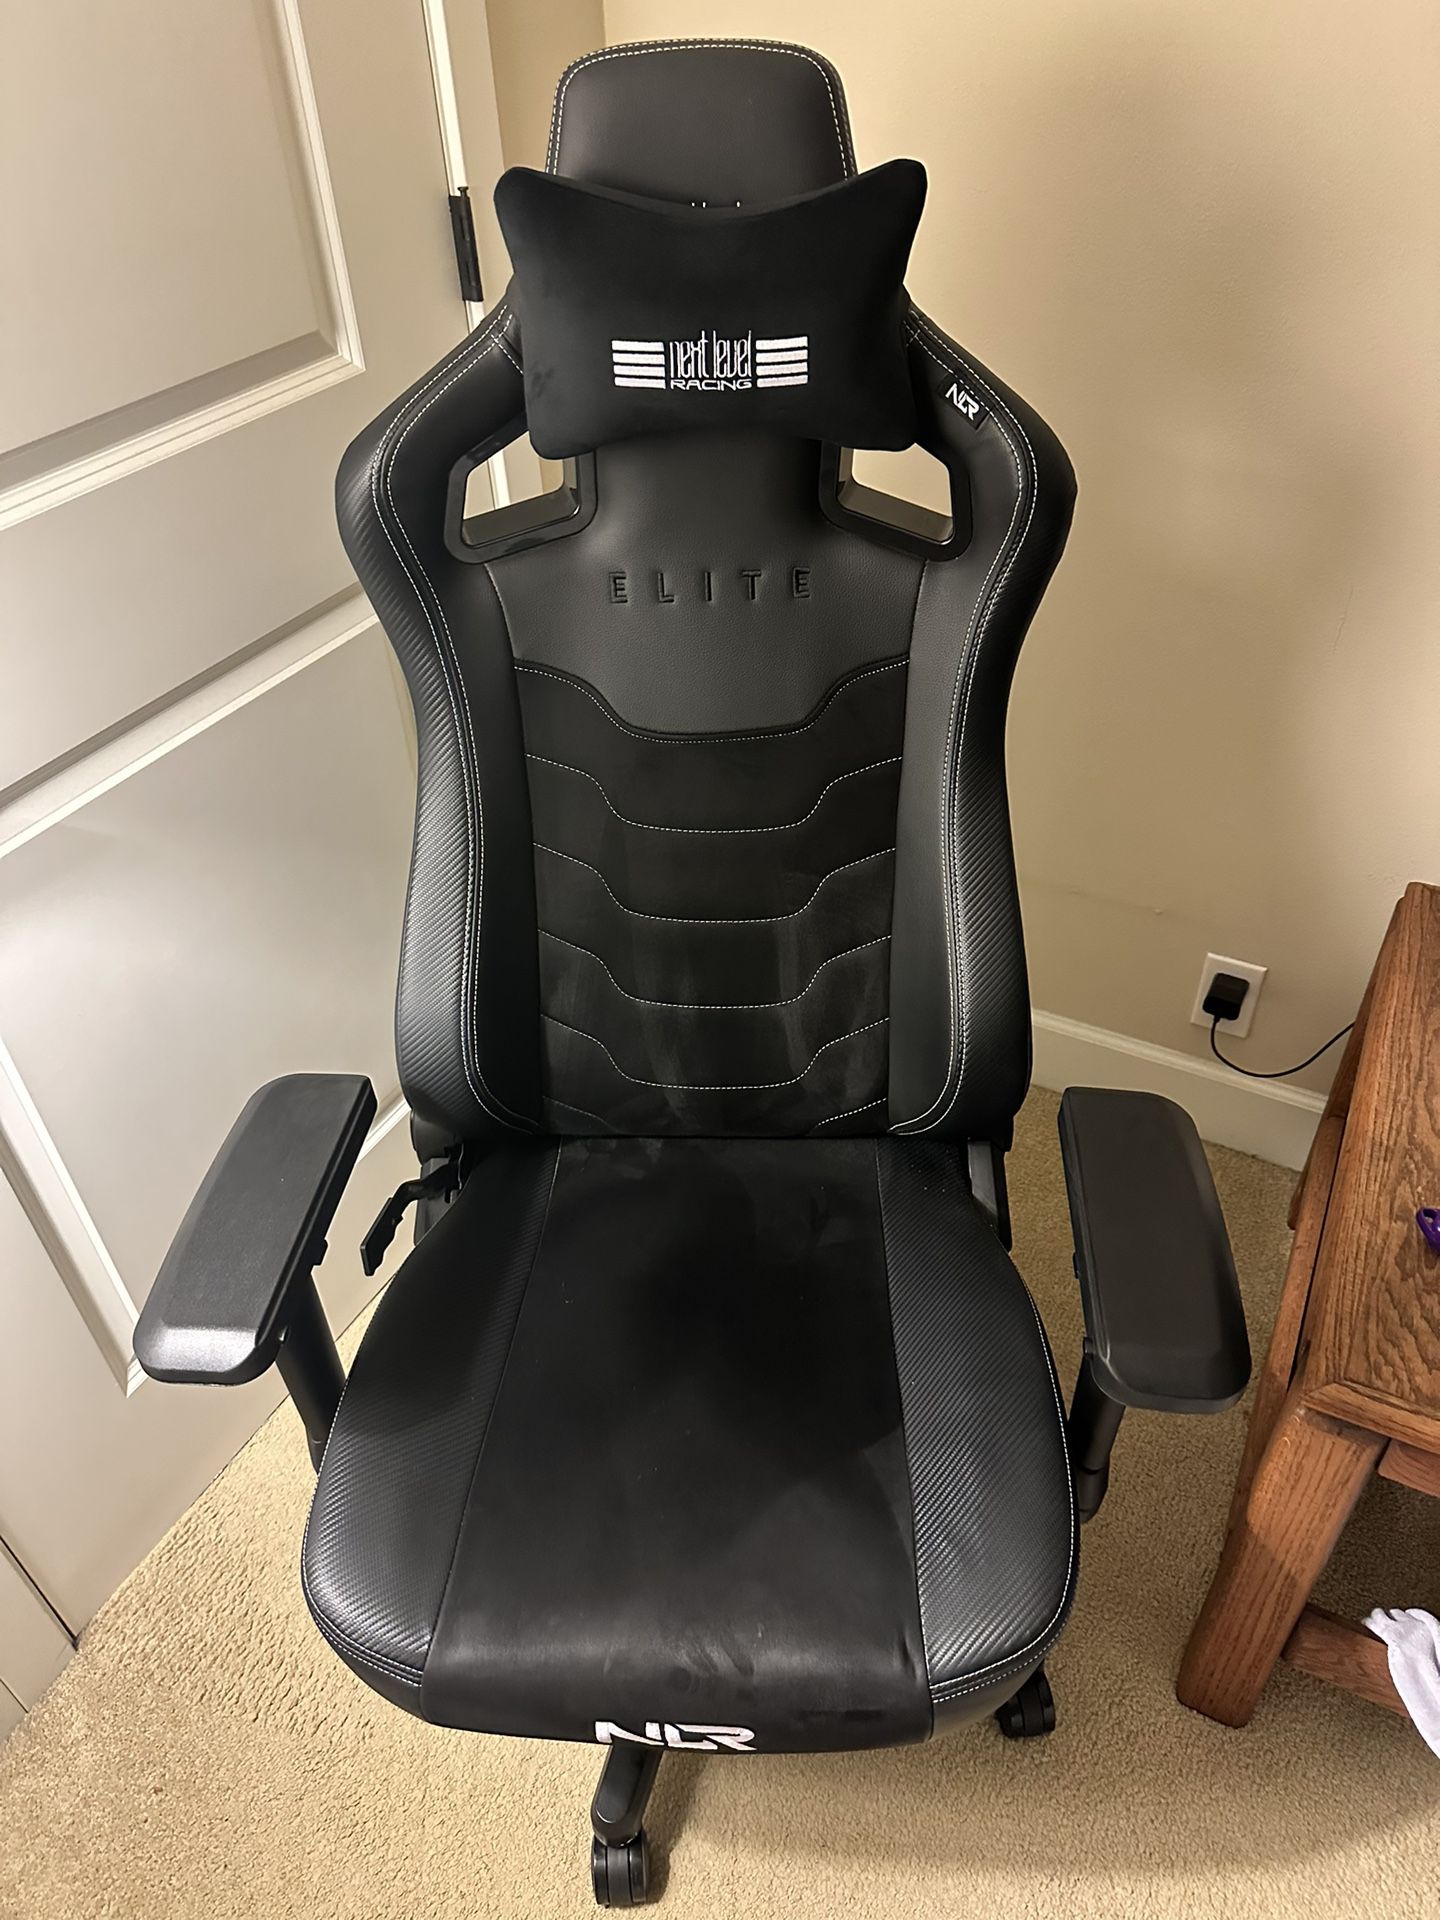 Next Level Racing Elite Gaming Chair Leather & Suede Edition 